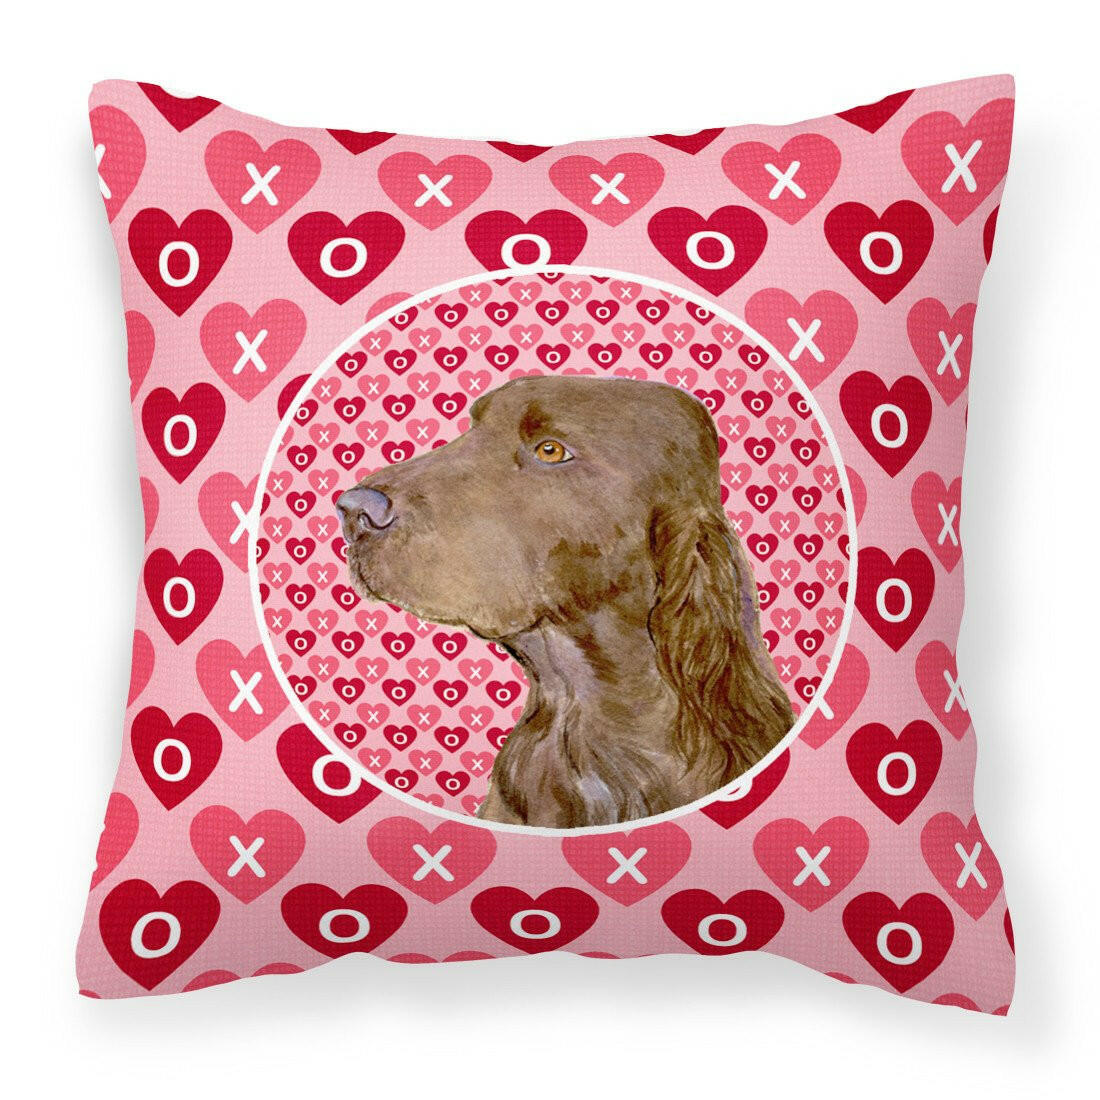 Field Spaniel Hearts Love and Valentine's Day Portrait Fabric Decorative Pillow SS4525PW1414 by Caroline's Treasures